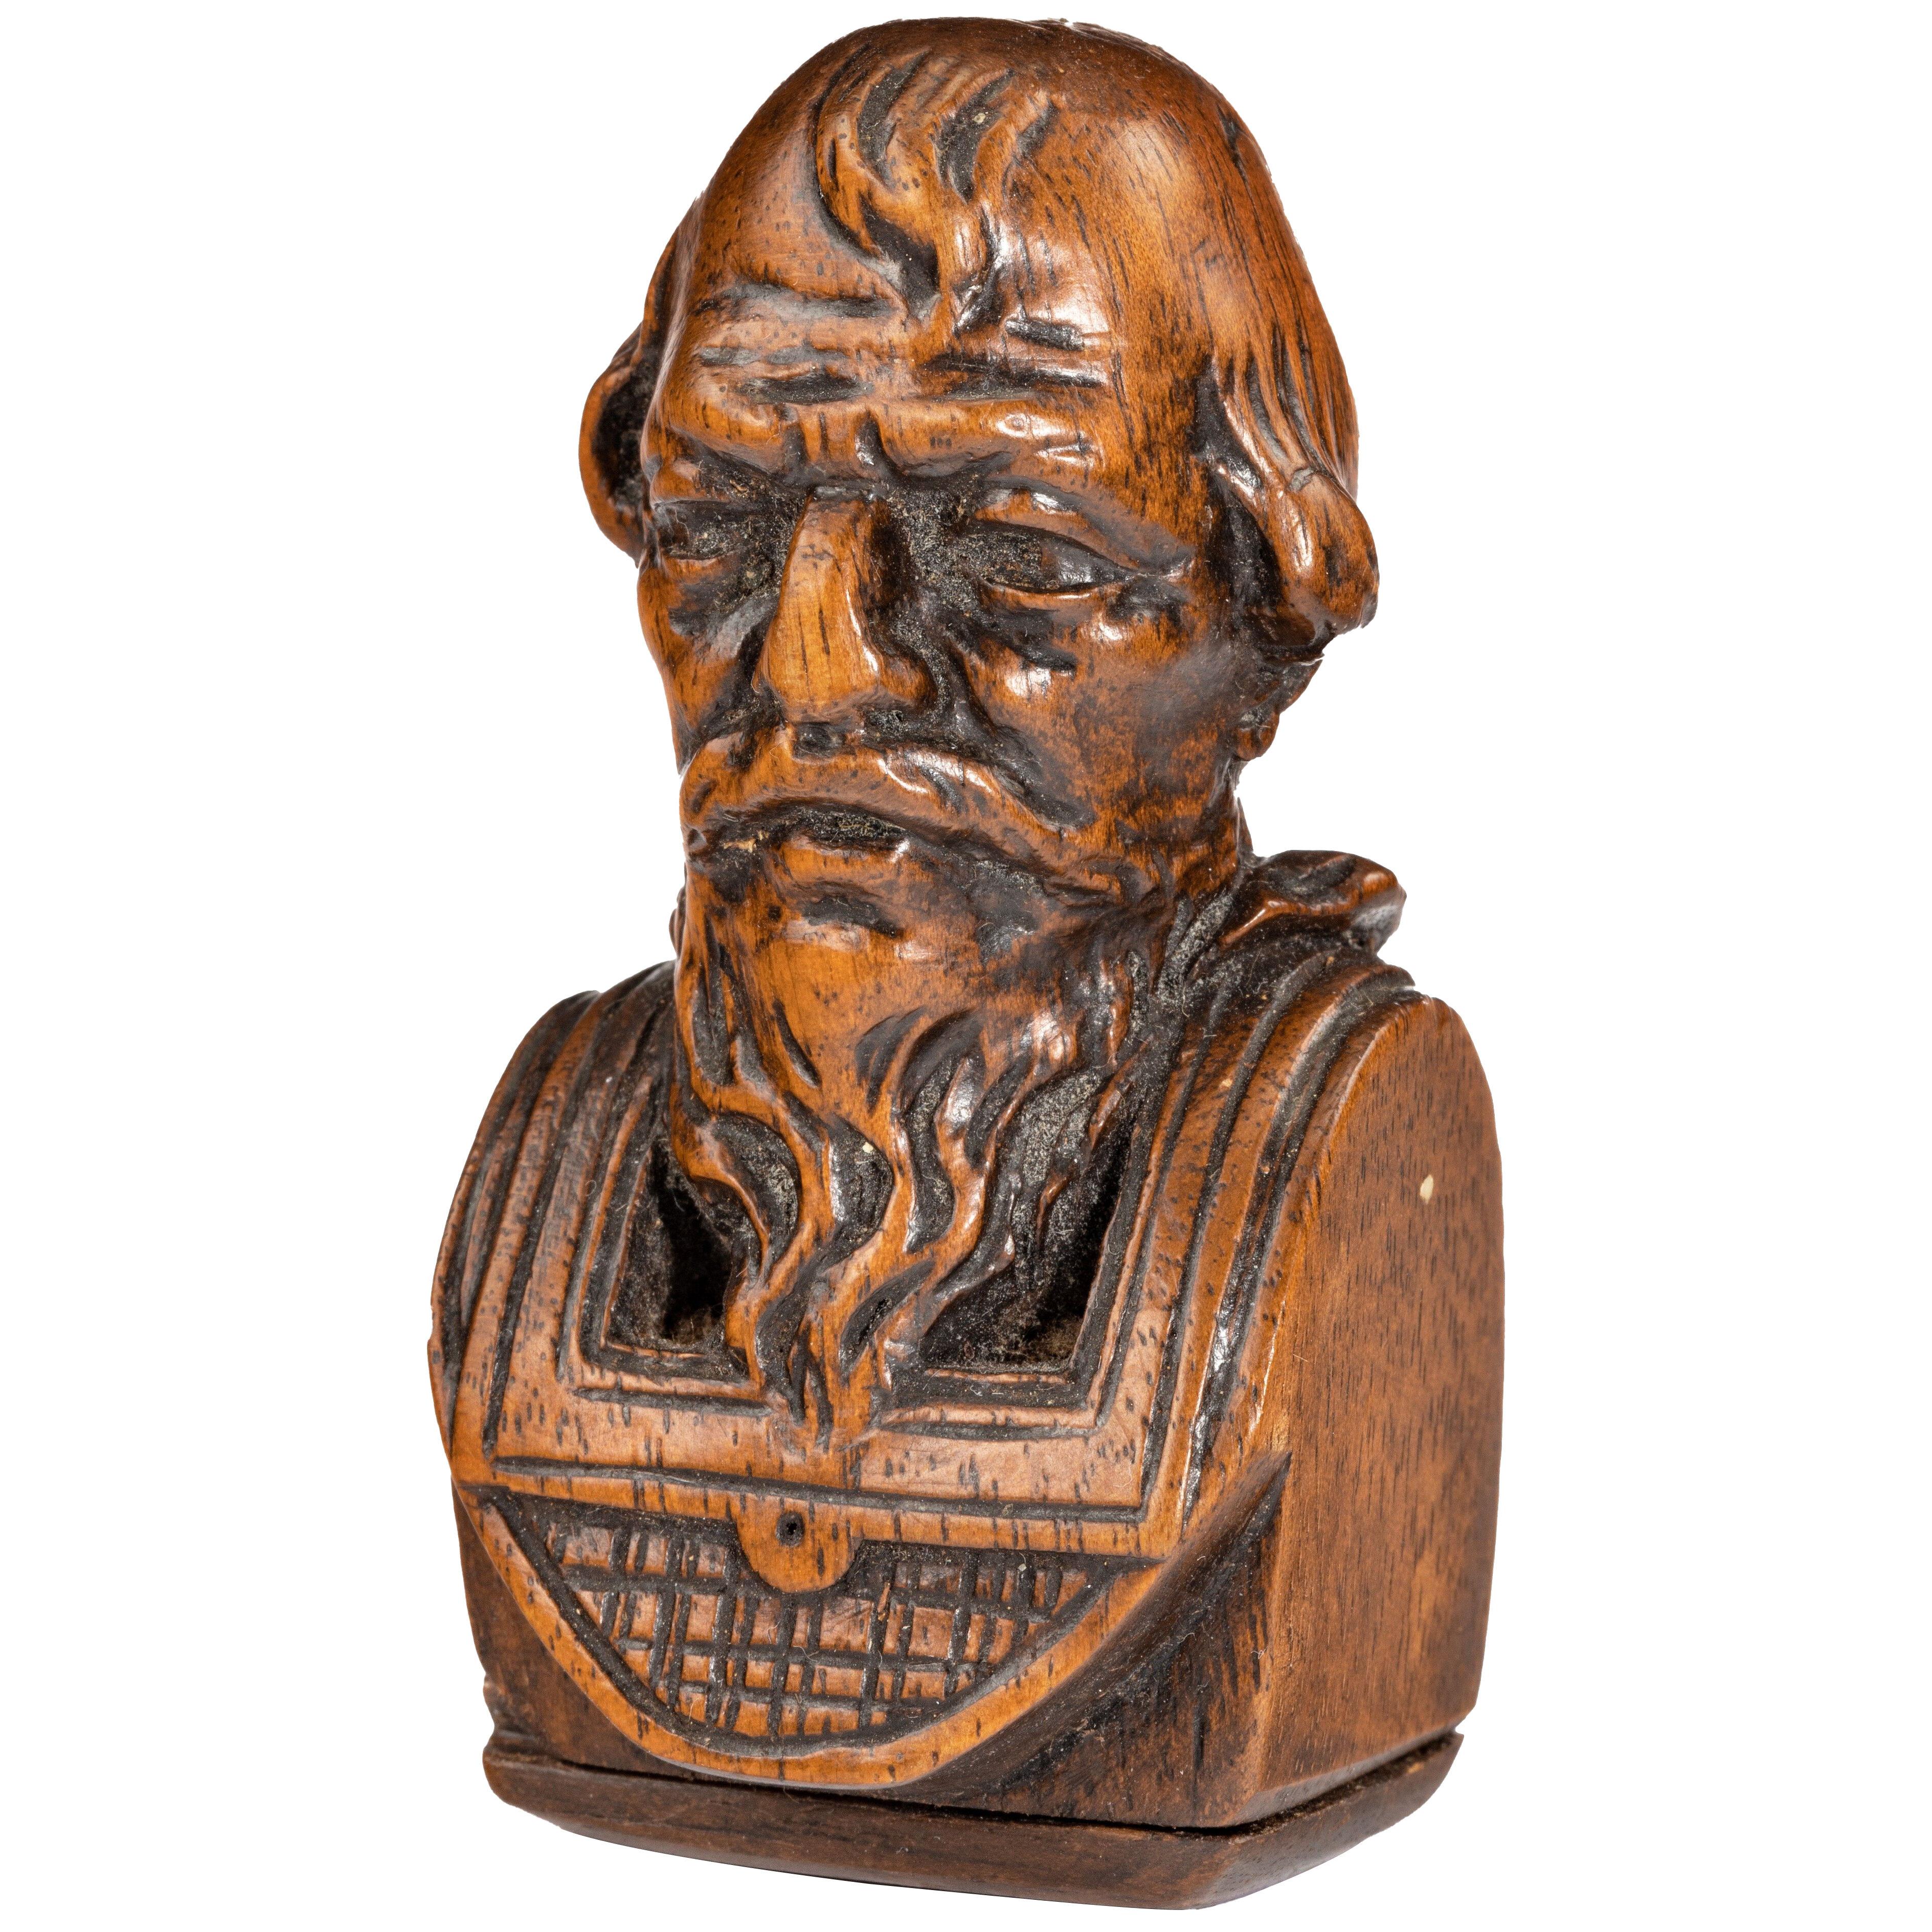 A snuff box in the form of a “Philosopher’s Head”